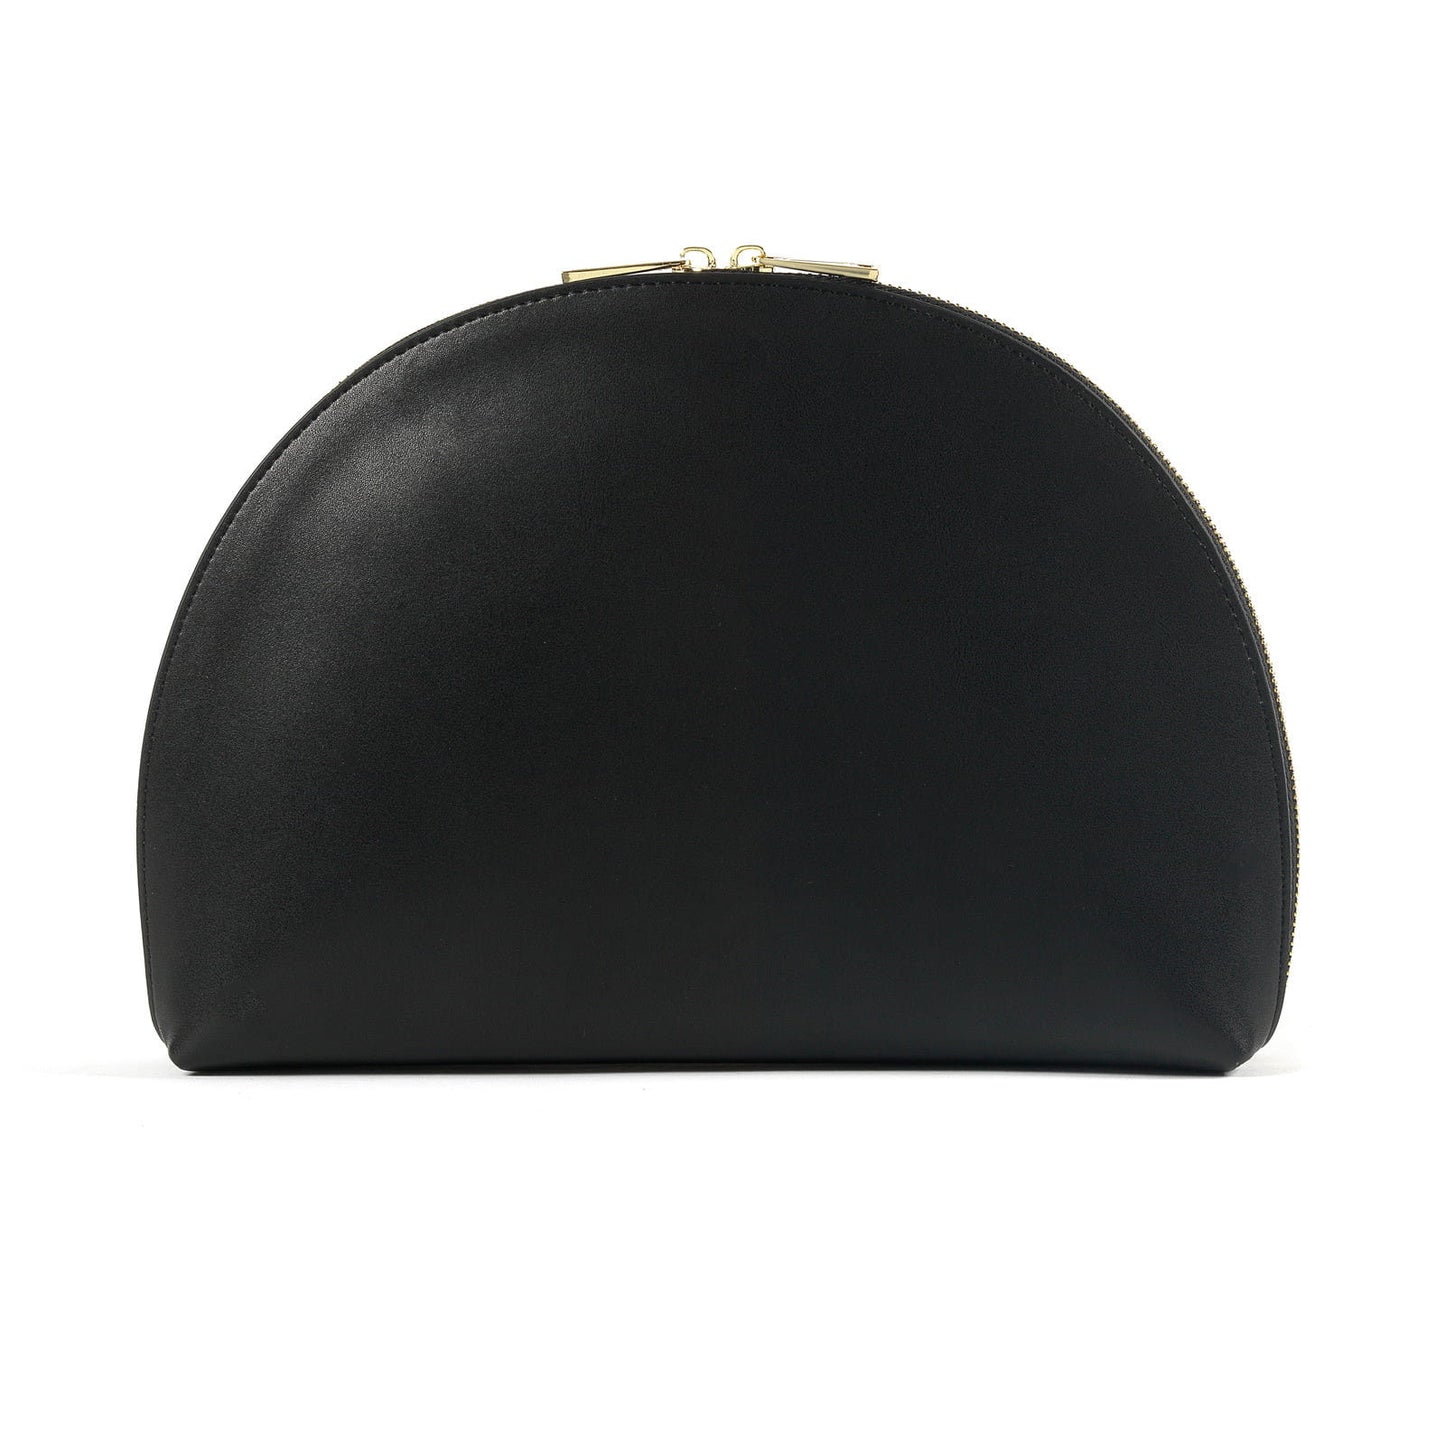 Blank Personalised Black Smooth Leather Half Moon Clutch